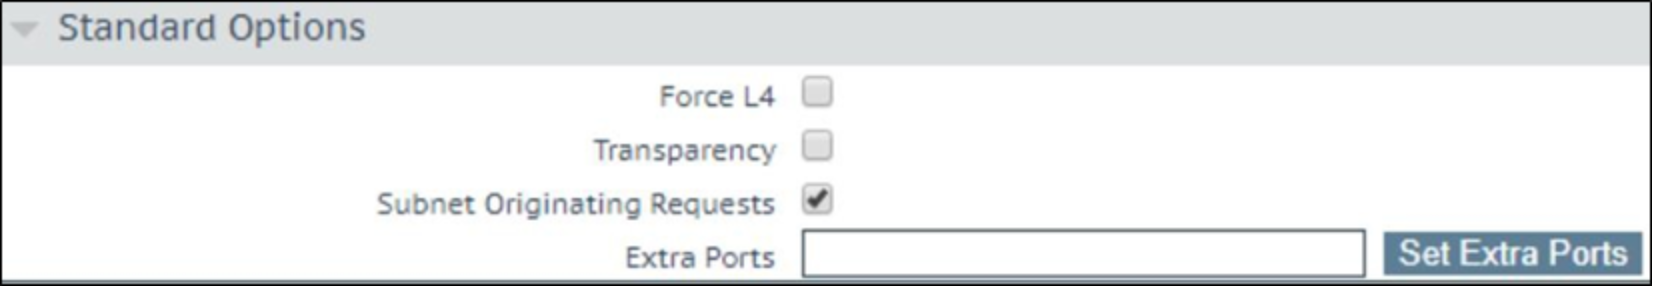 The Standard Options section of a virtual service that shows subnet originating requests enabled